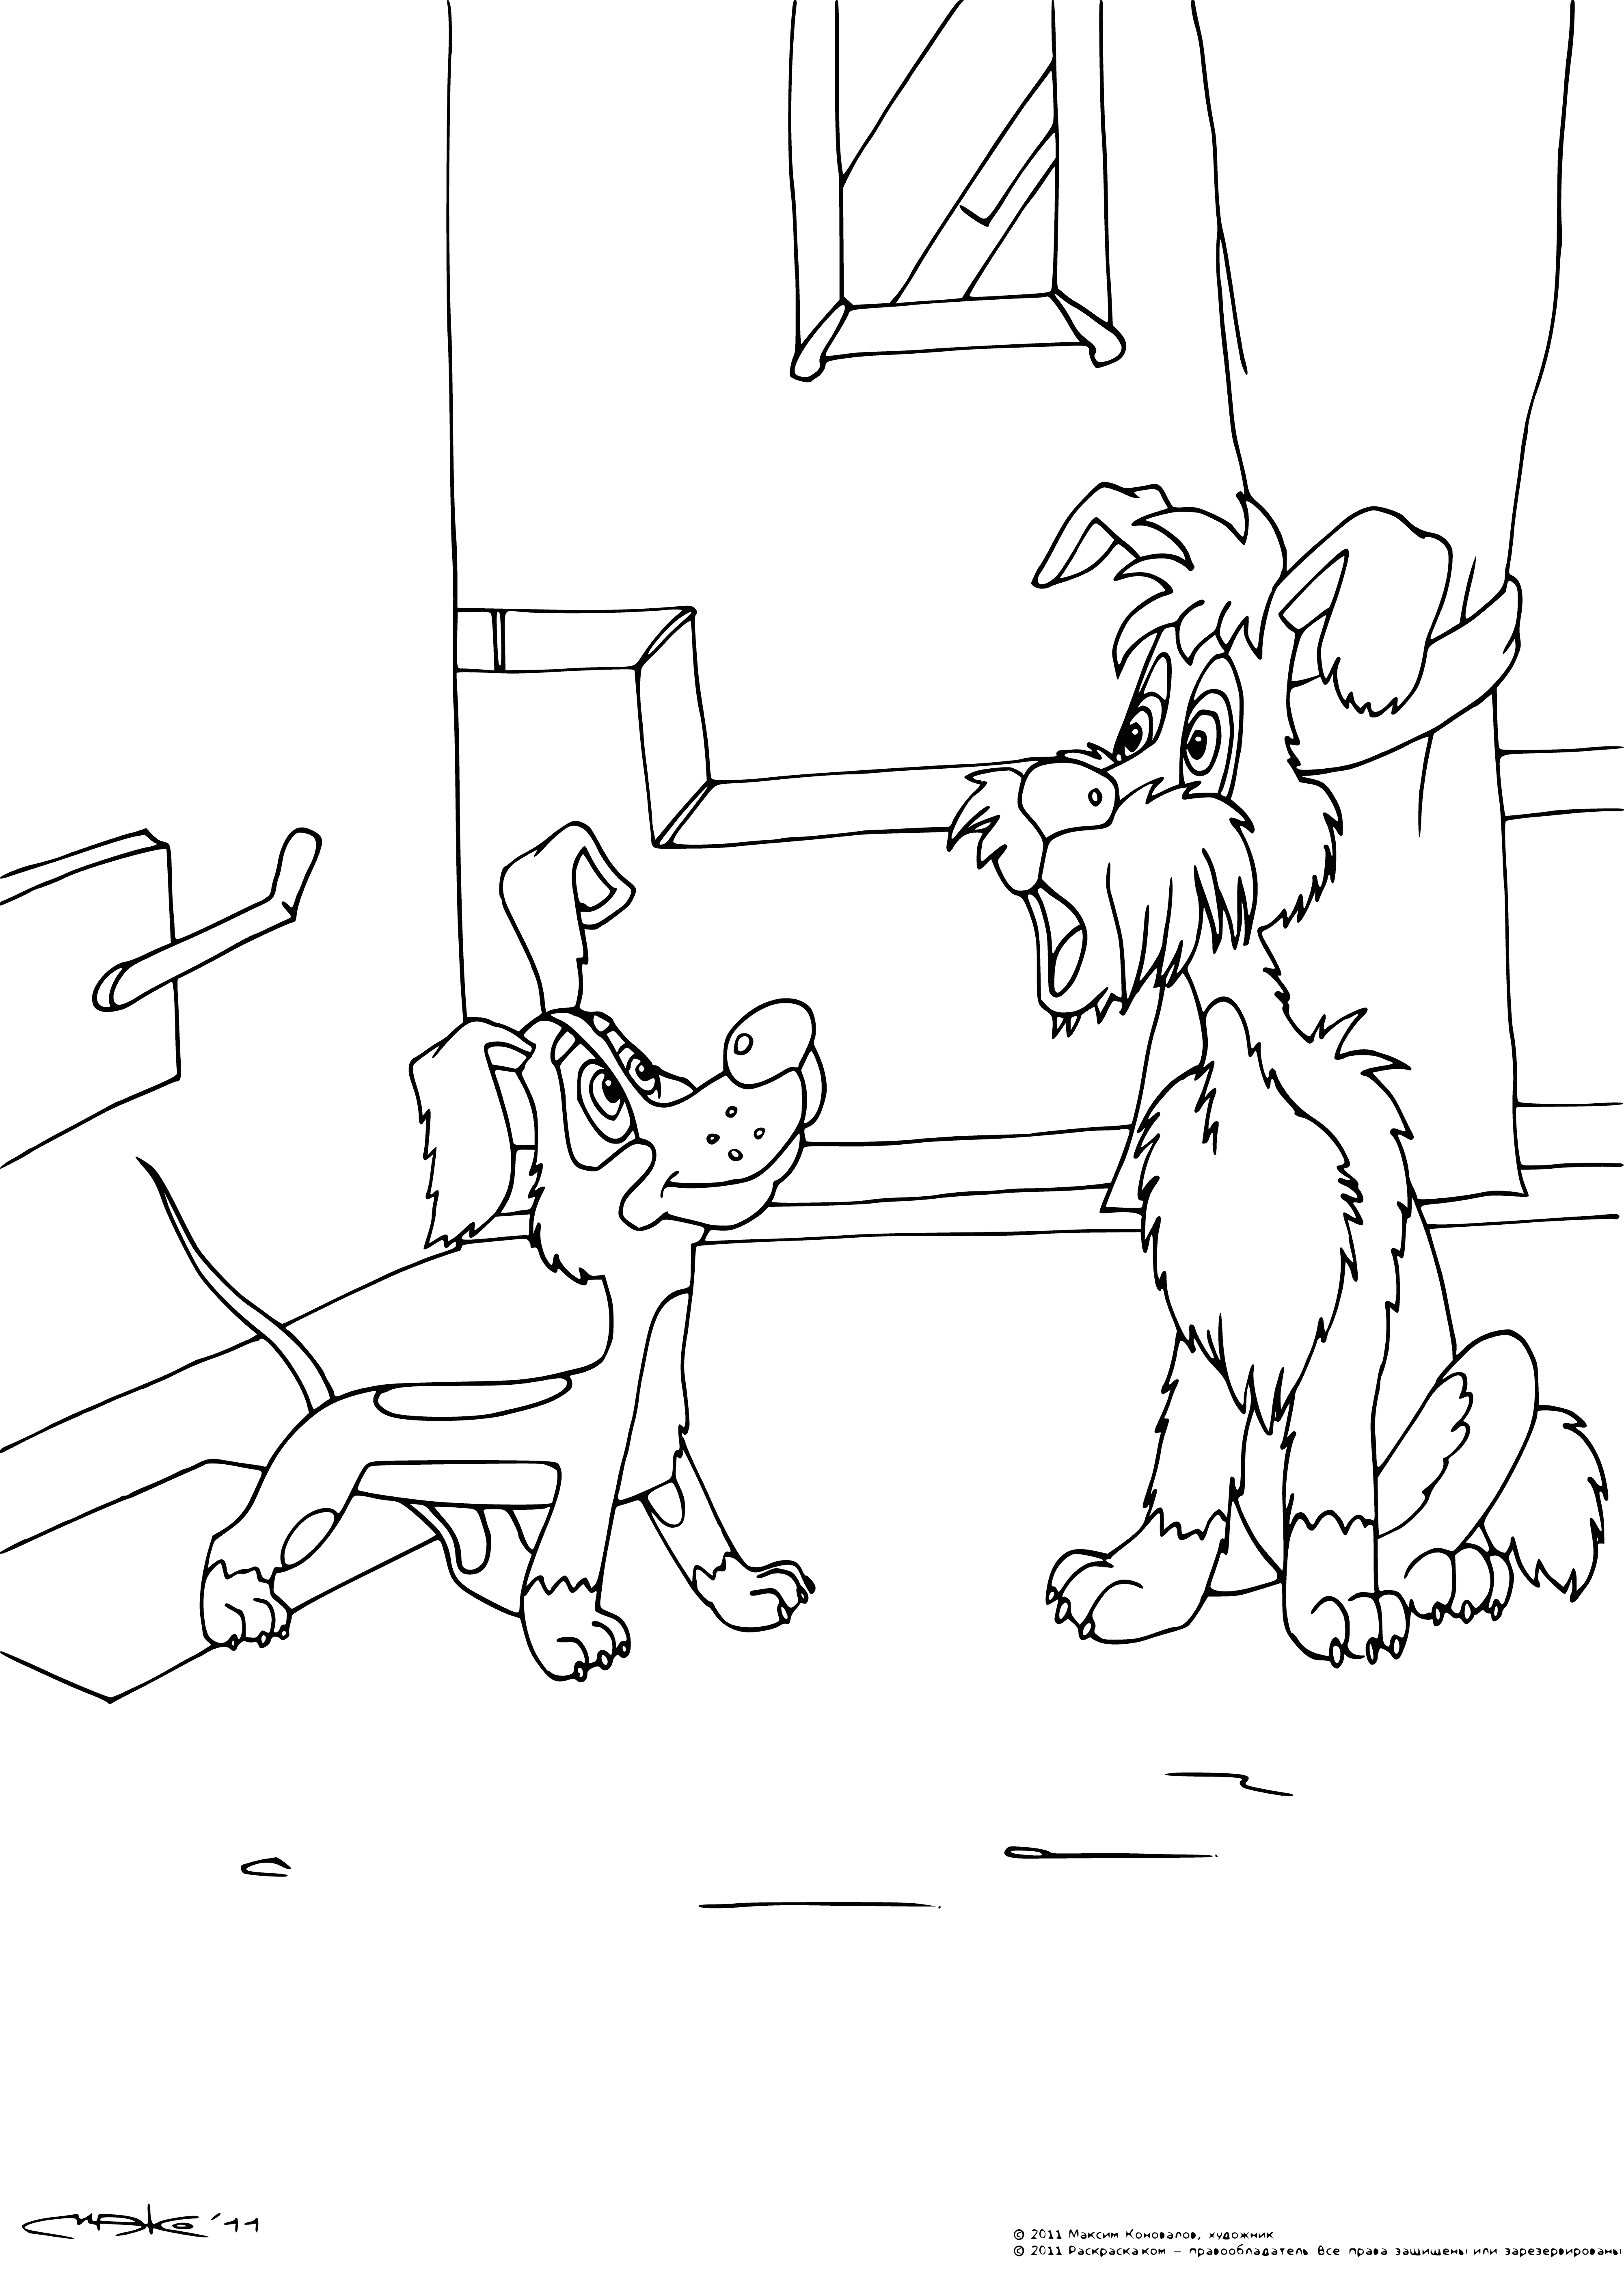 coloring page: Bobik, a small brown pup, stands on hind legs to greet Barbos, a white canine, in an adorable display of friendship.